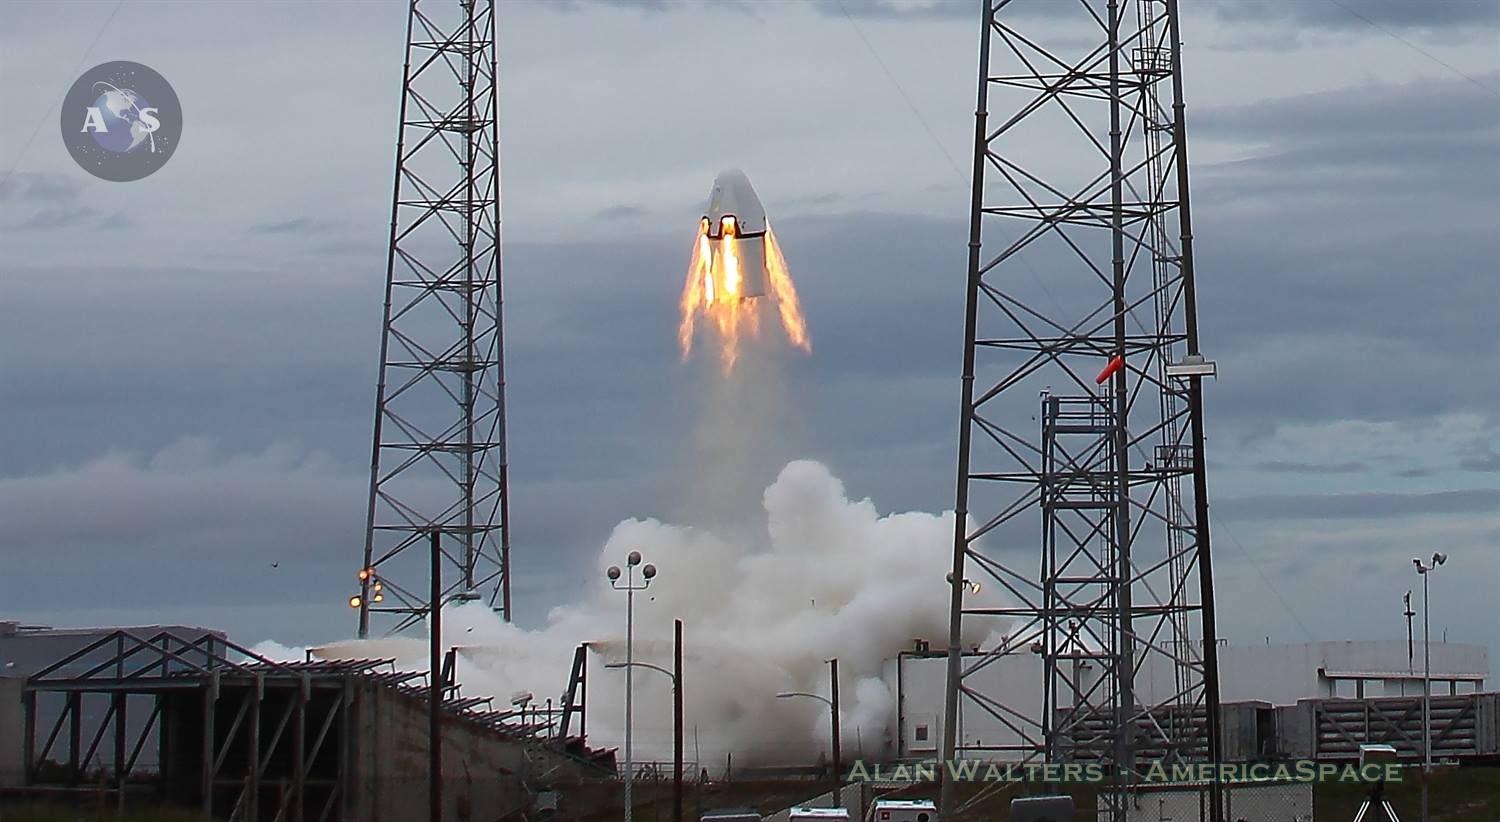 The SpaceX Crew Dragon engineering test article taking flight for its Pad Abort Test (PAT) on May 6, 2015. The PAT demonstration was a critical milestone in the company's aim to begin transporting astronauts to and from the ISS safely in the next couple years. Photo Credit: Alan Walters / AmericaSpace